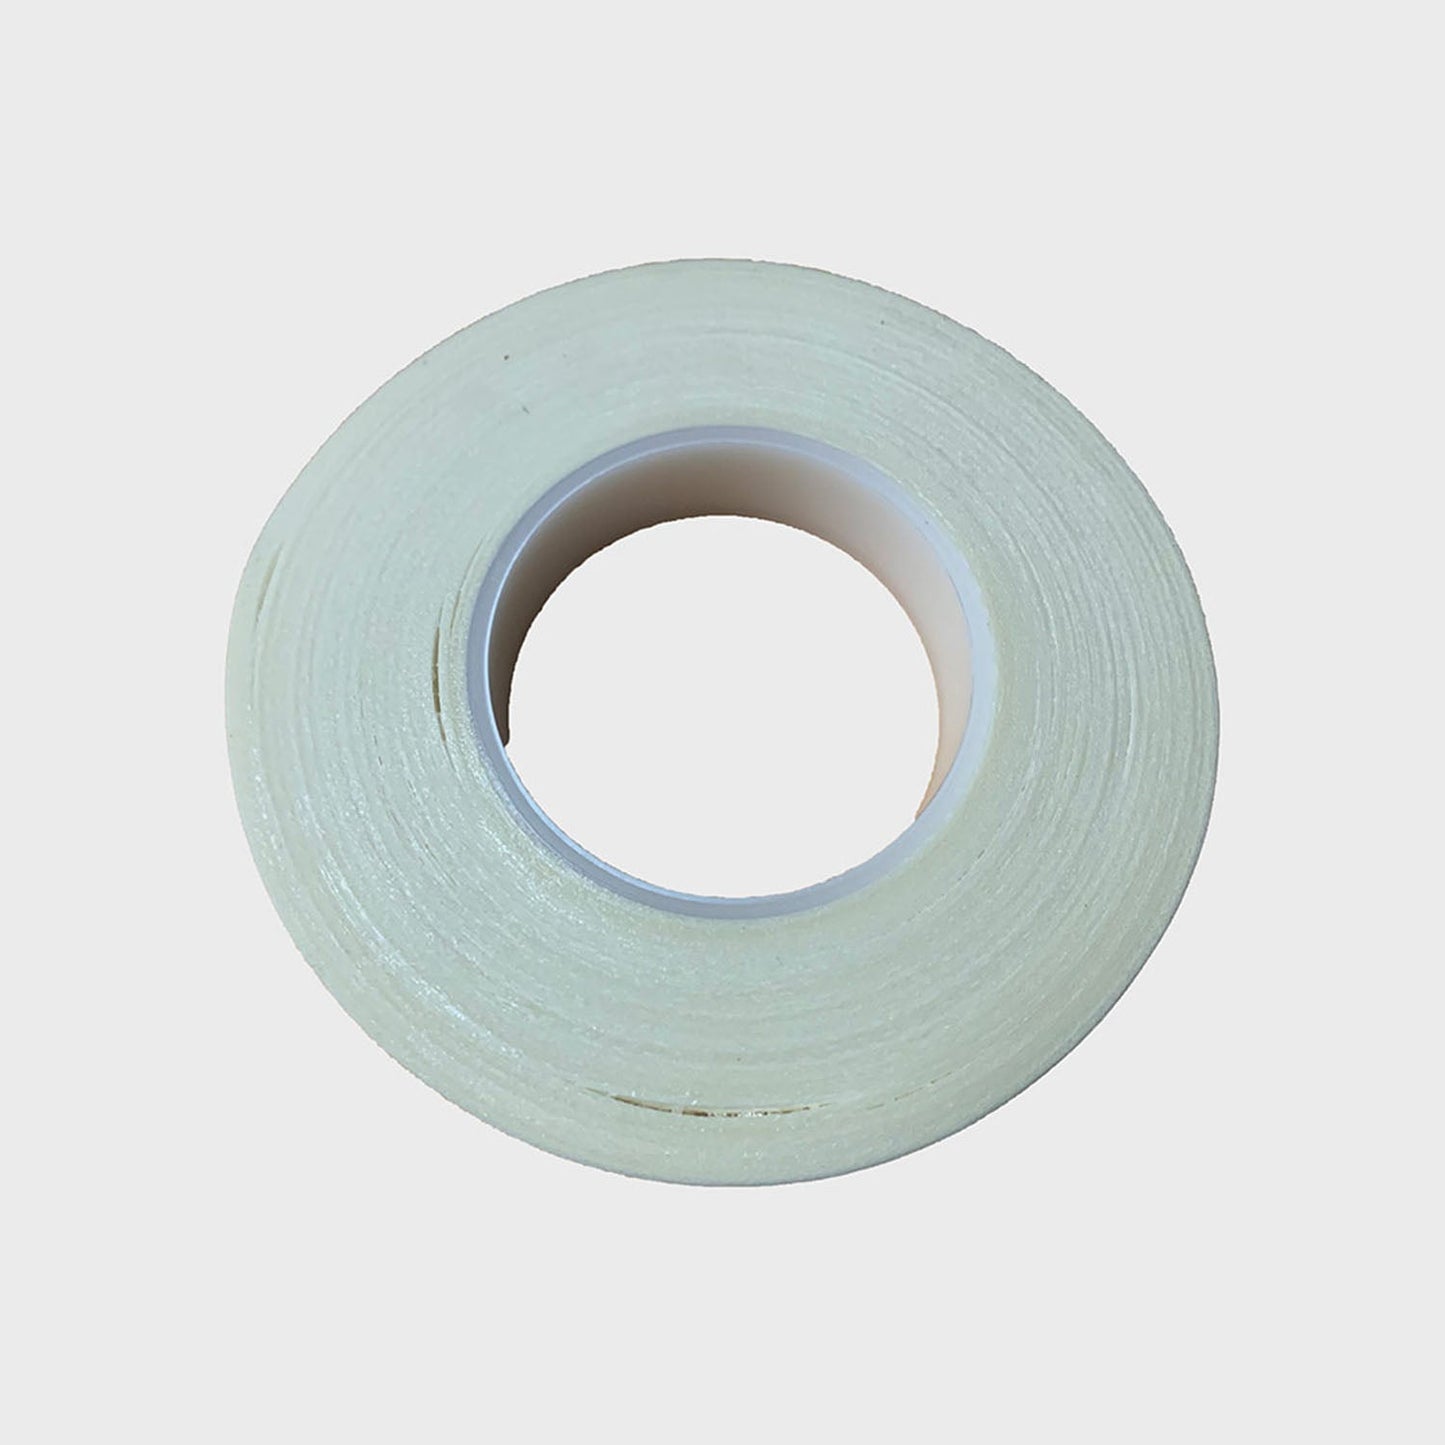 Double-sided Membrane Tape 24mm (50 metres) per Roll - Tight House